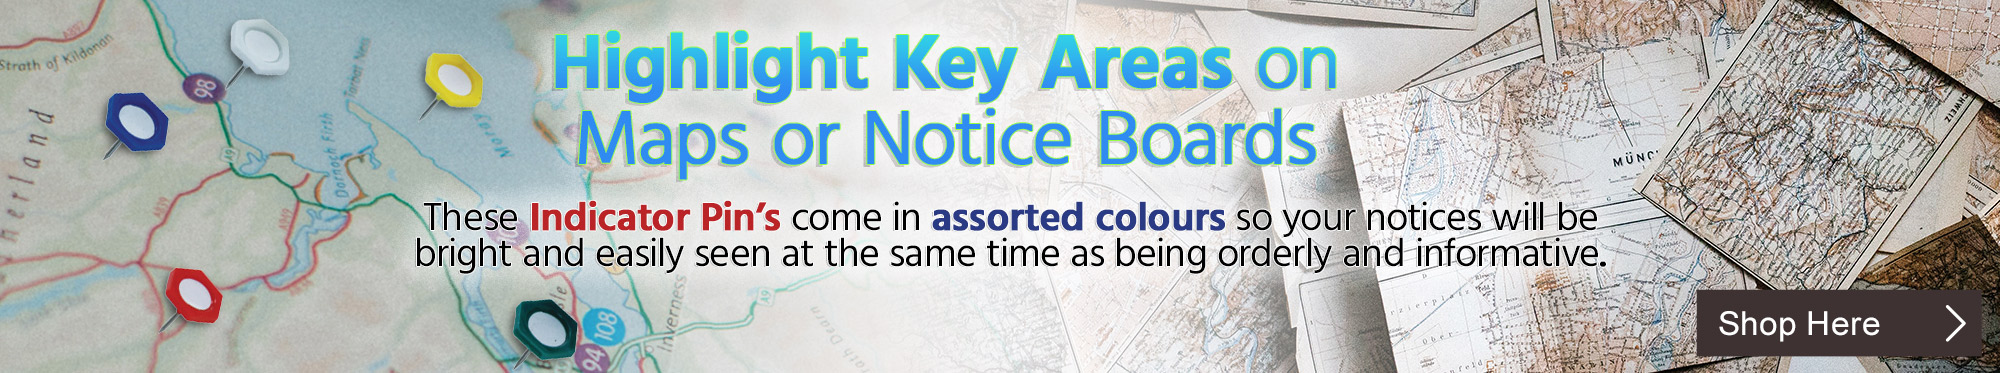 Highlight Key Areas on Maps or Notice Boards